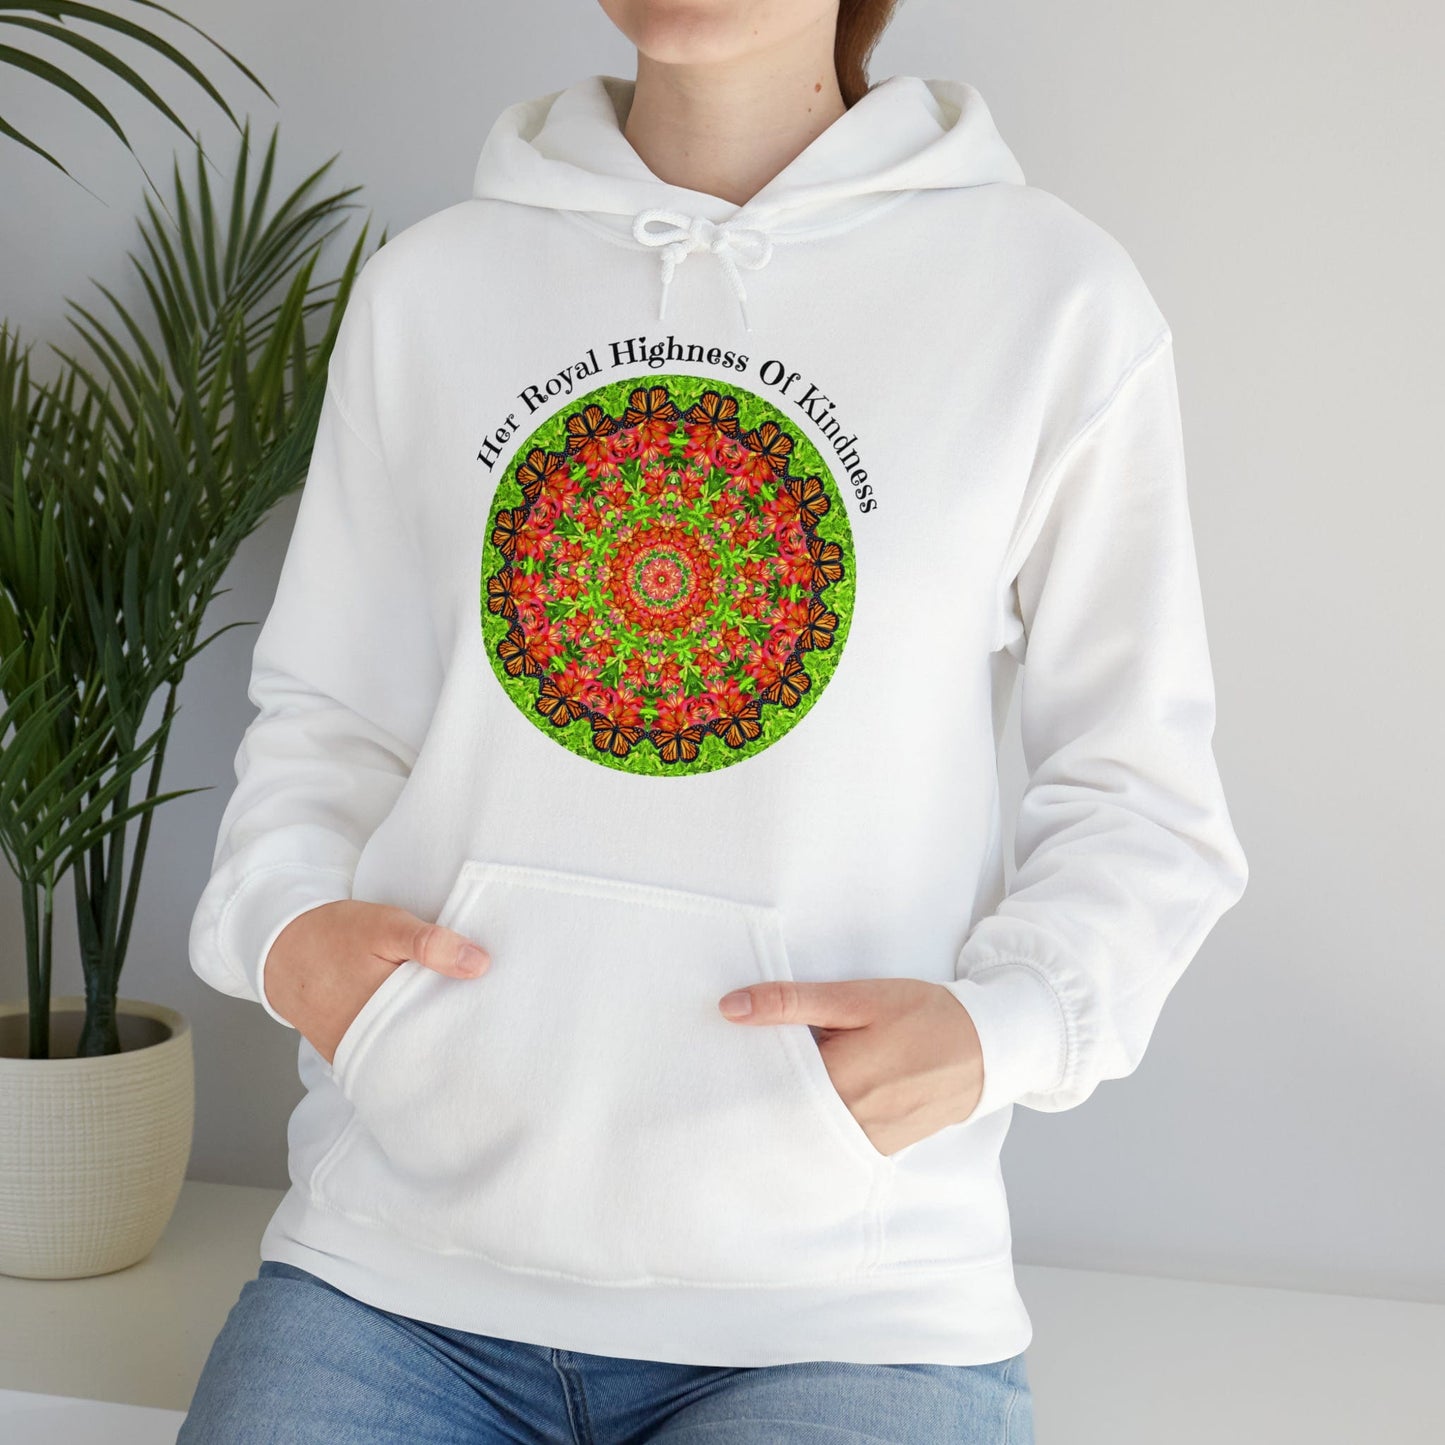 Pretty & Cute Butterfly Kindness Graphic Hoodie Sweatshirt Monarch Butterfly Mandala Art Her Royal Highness Of Kindness white